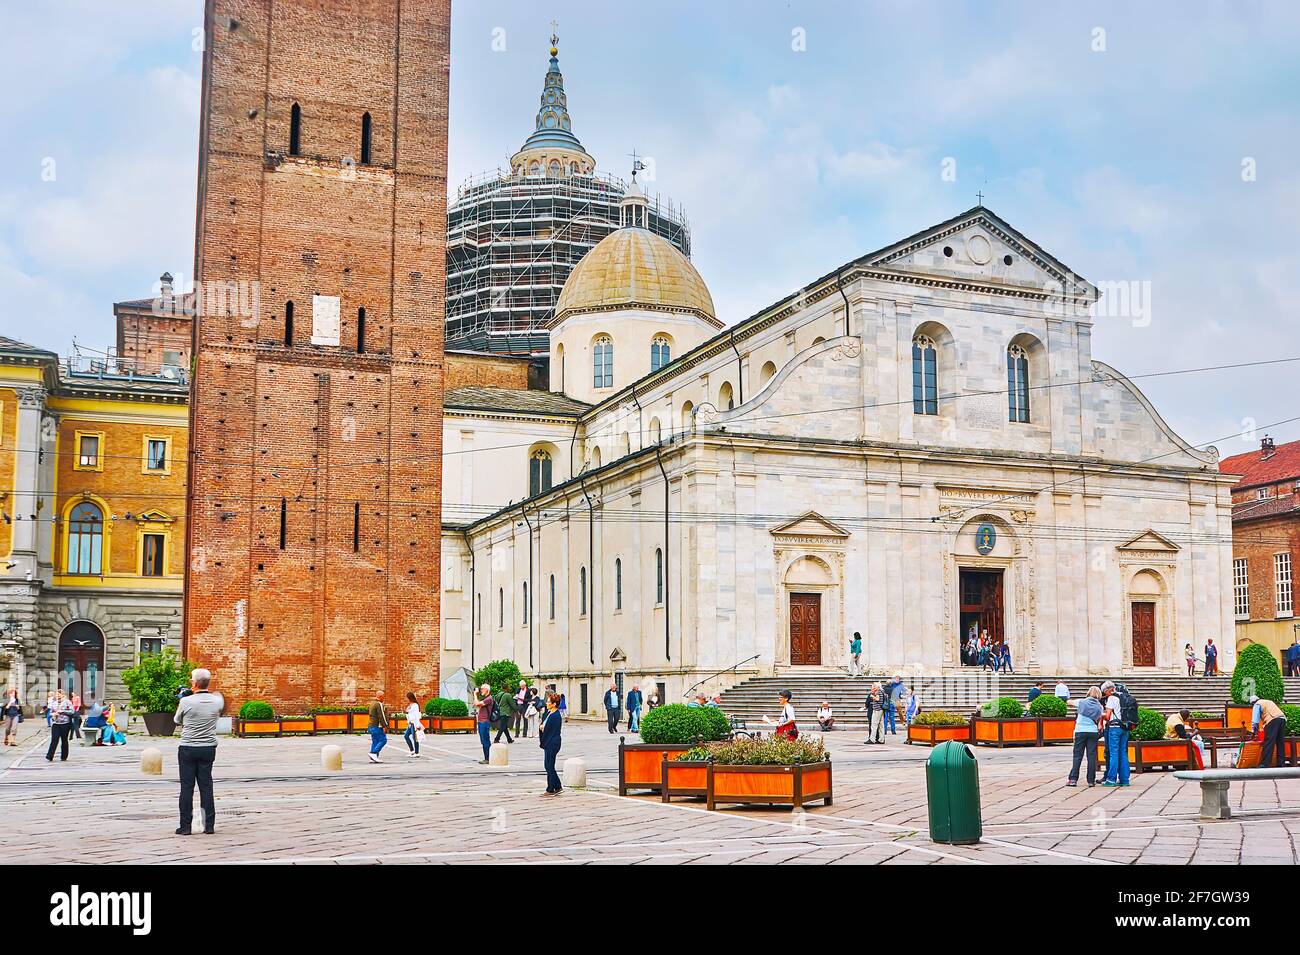 TURIN, ITALY - May 9, 2012: The medieval St  John the Baptist Cathedral (Duomo di Torino) with brick bell tower (Campanile) and white marbel facade, l Stock Photo